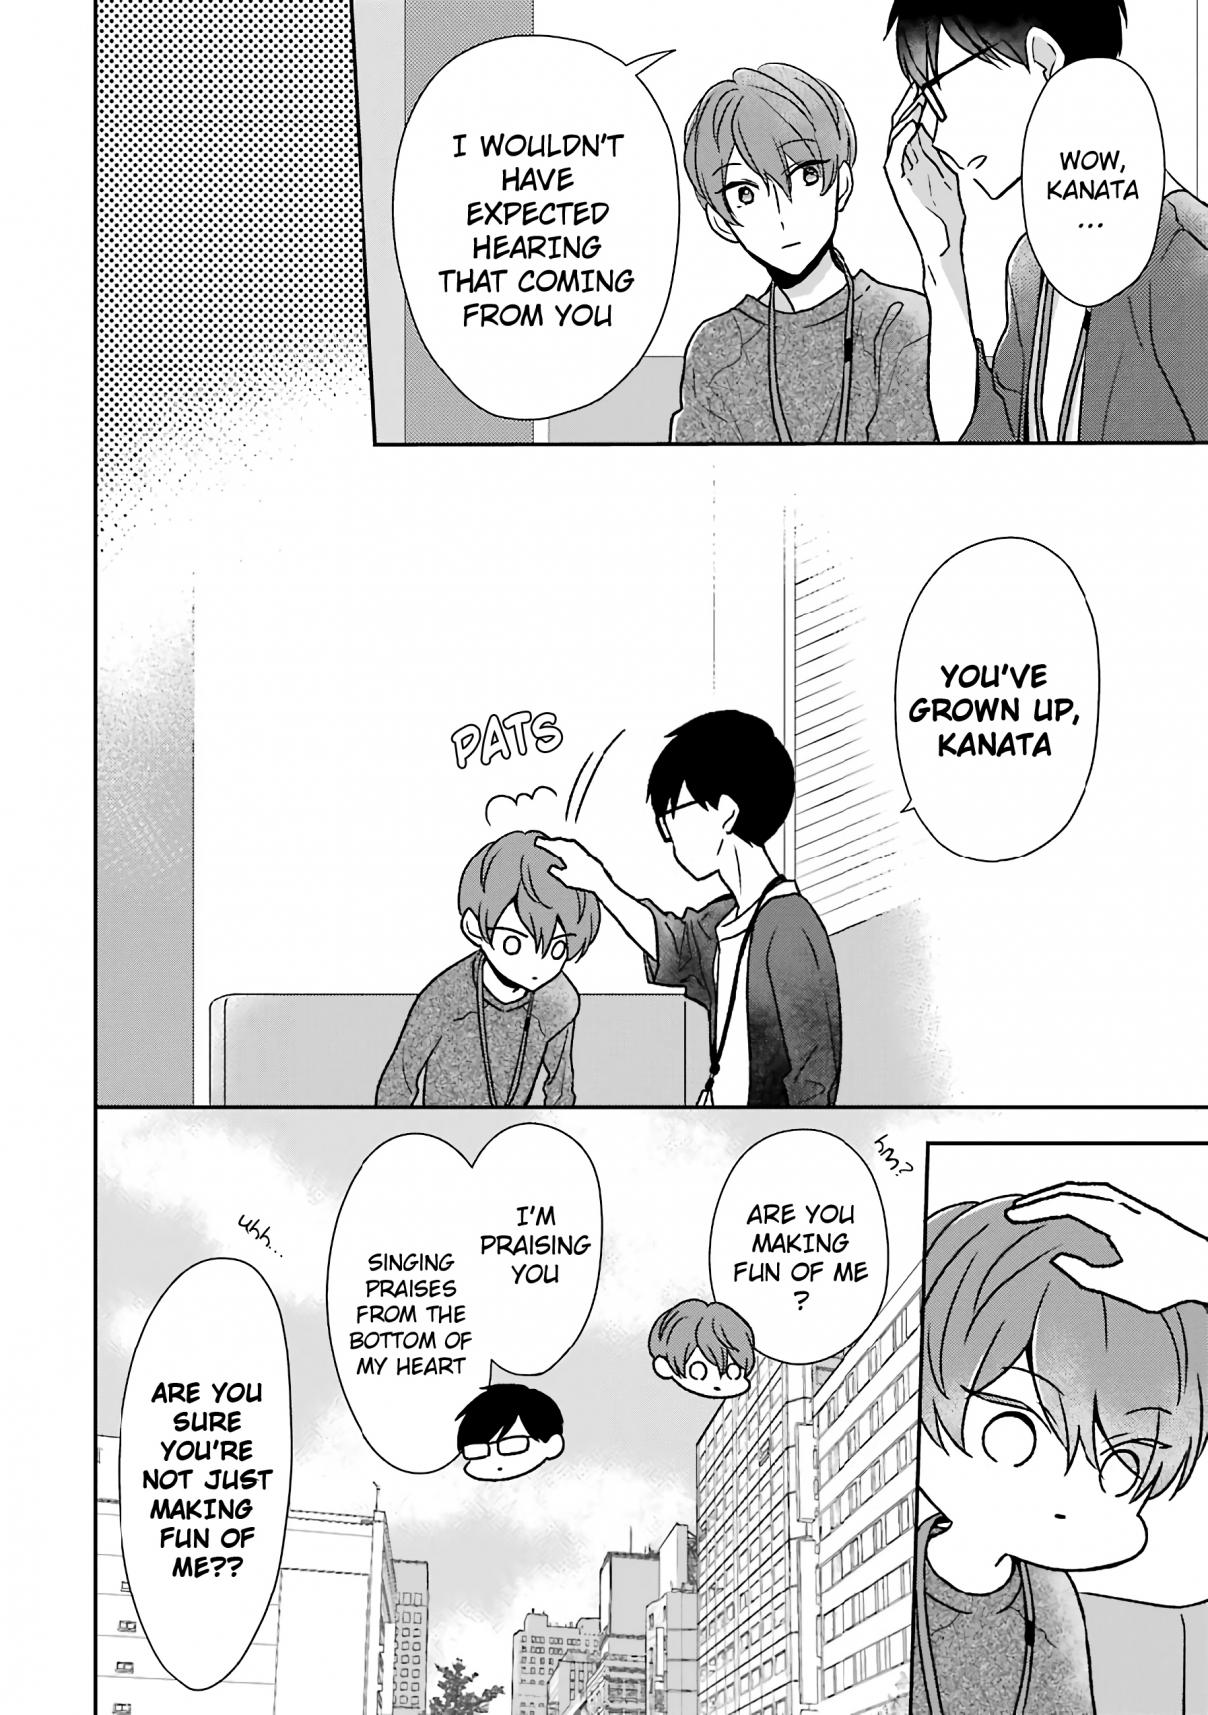 I'm Nearly 30, But This Is My First Love Vol. 3 Ch. 21